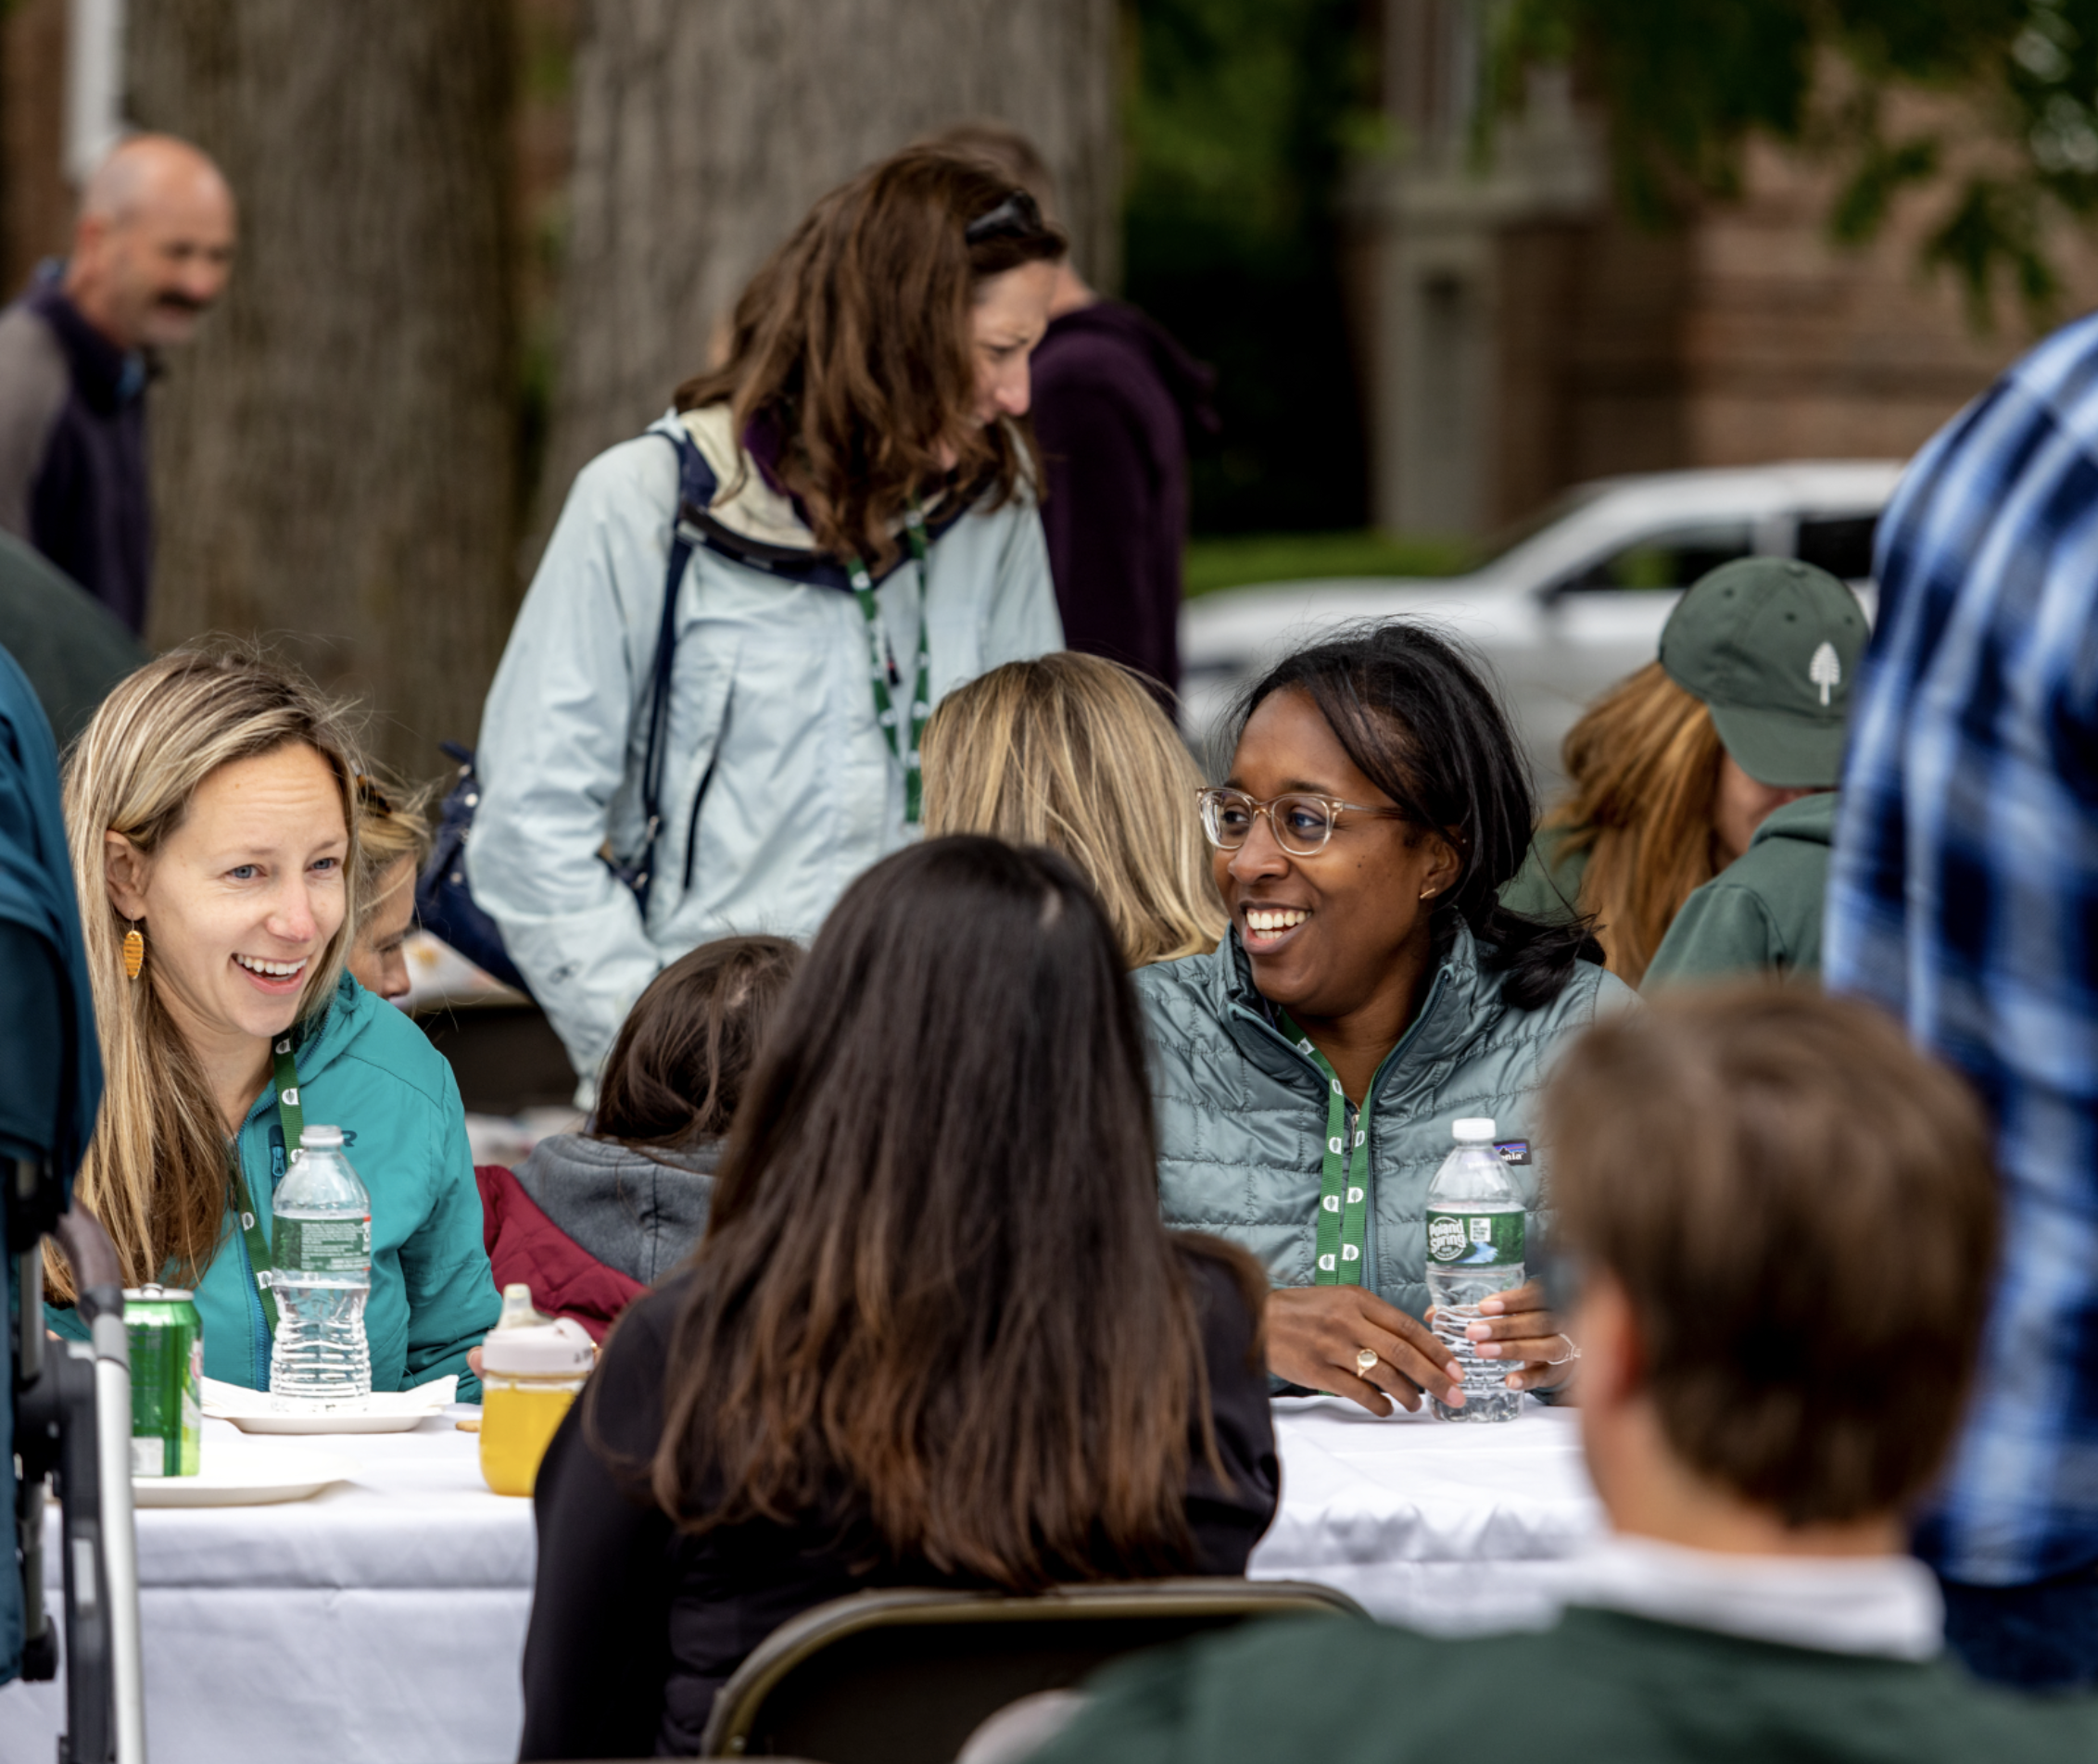 Alumnae seated at a table outdoors talking